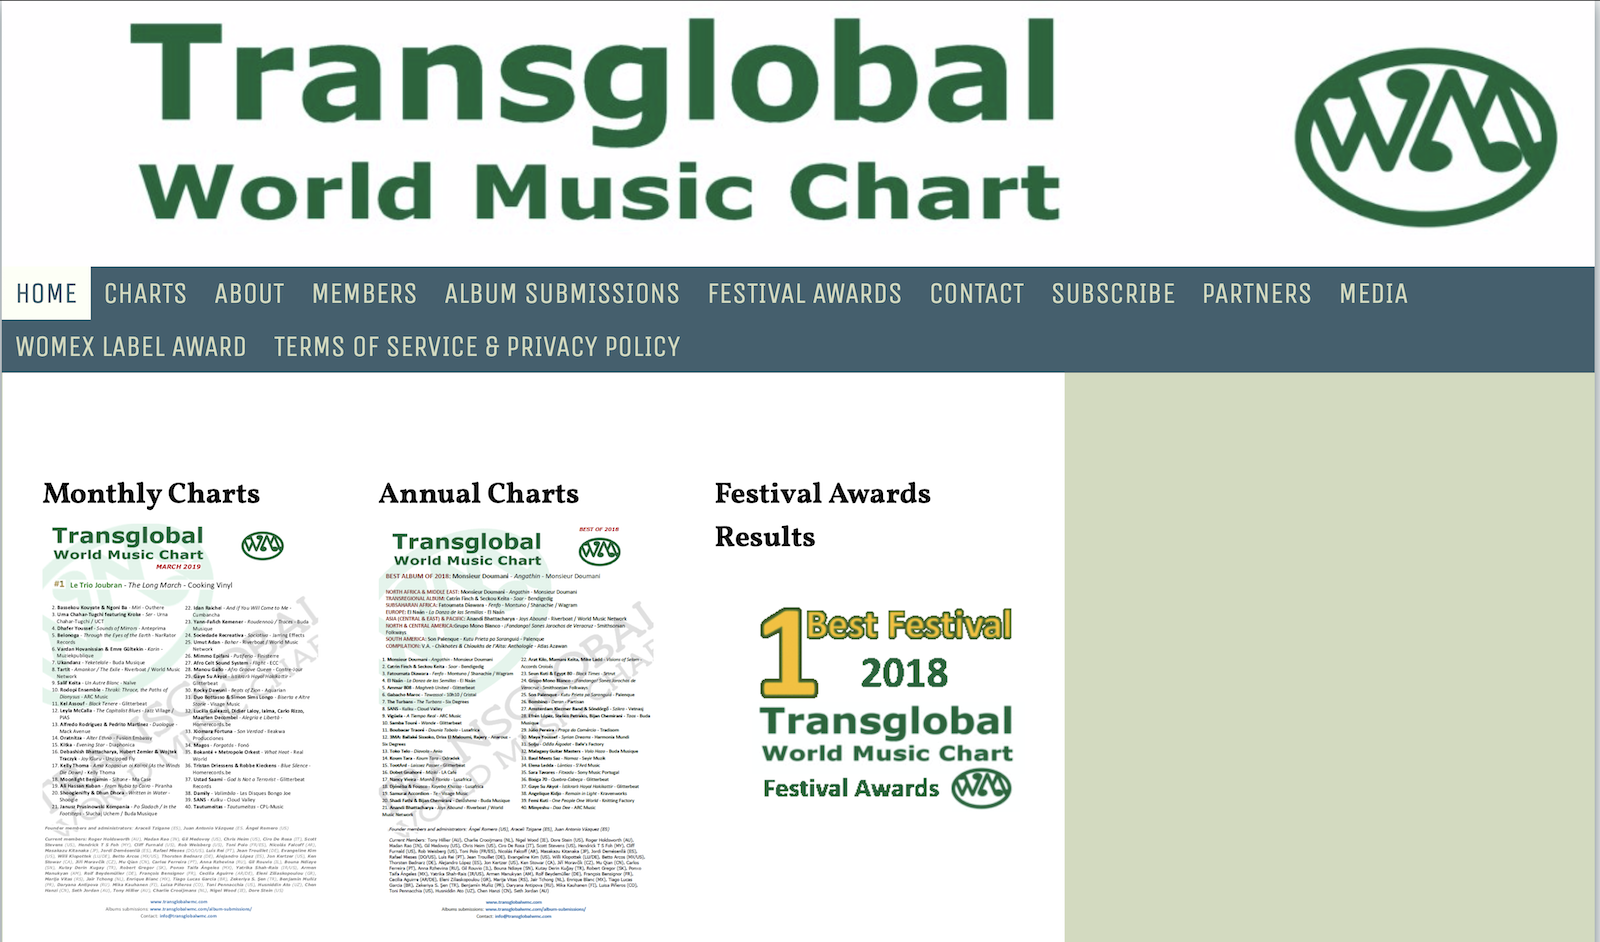 Salam is Panelist of Transglobal World Music Chart!